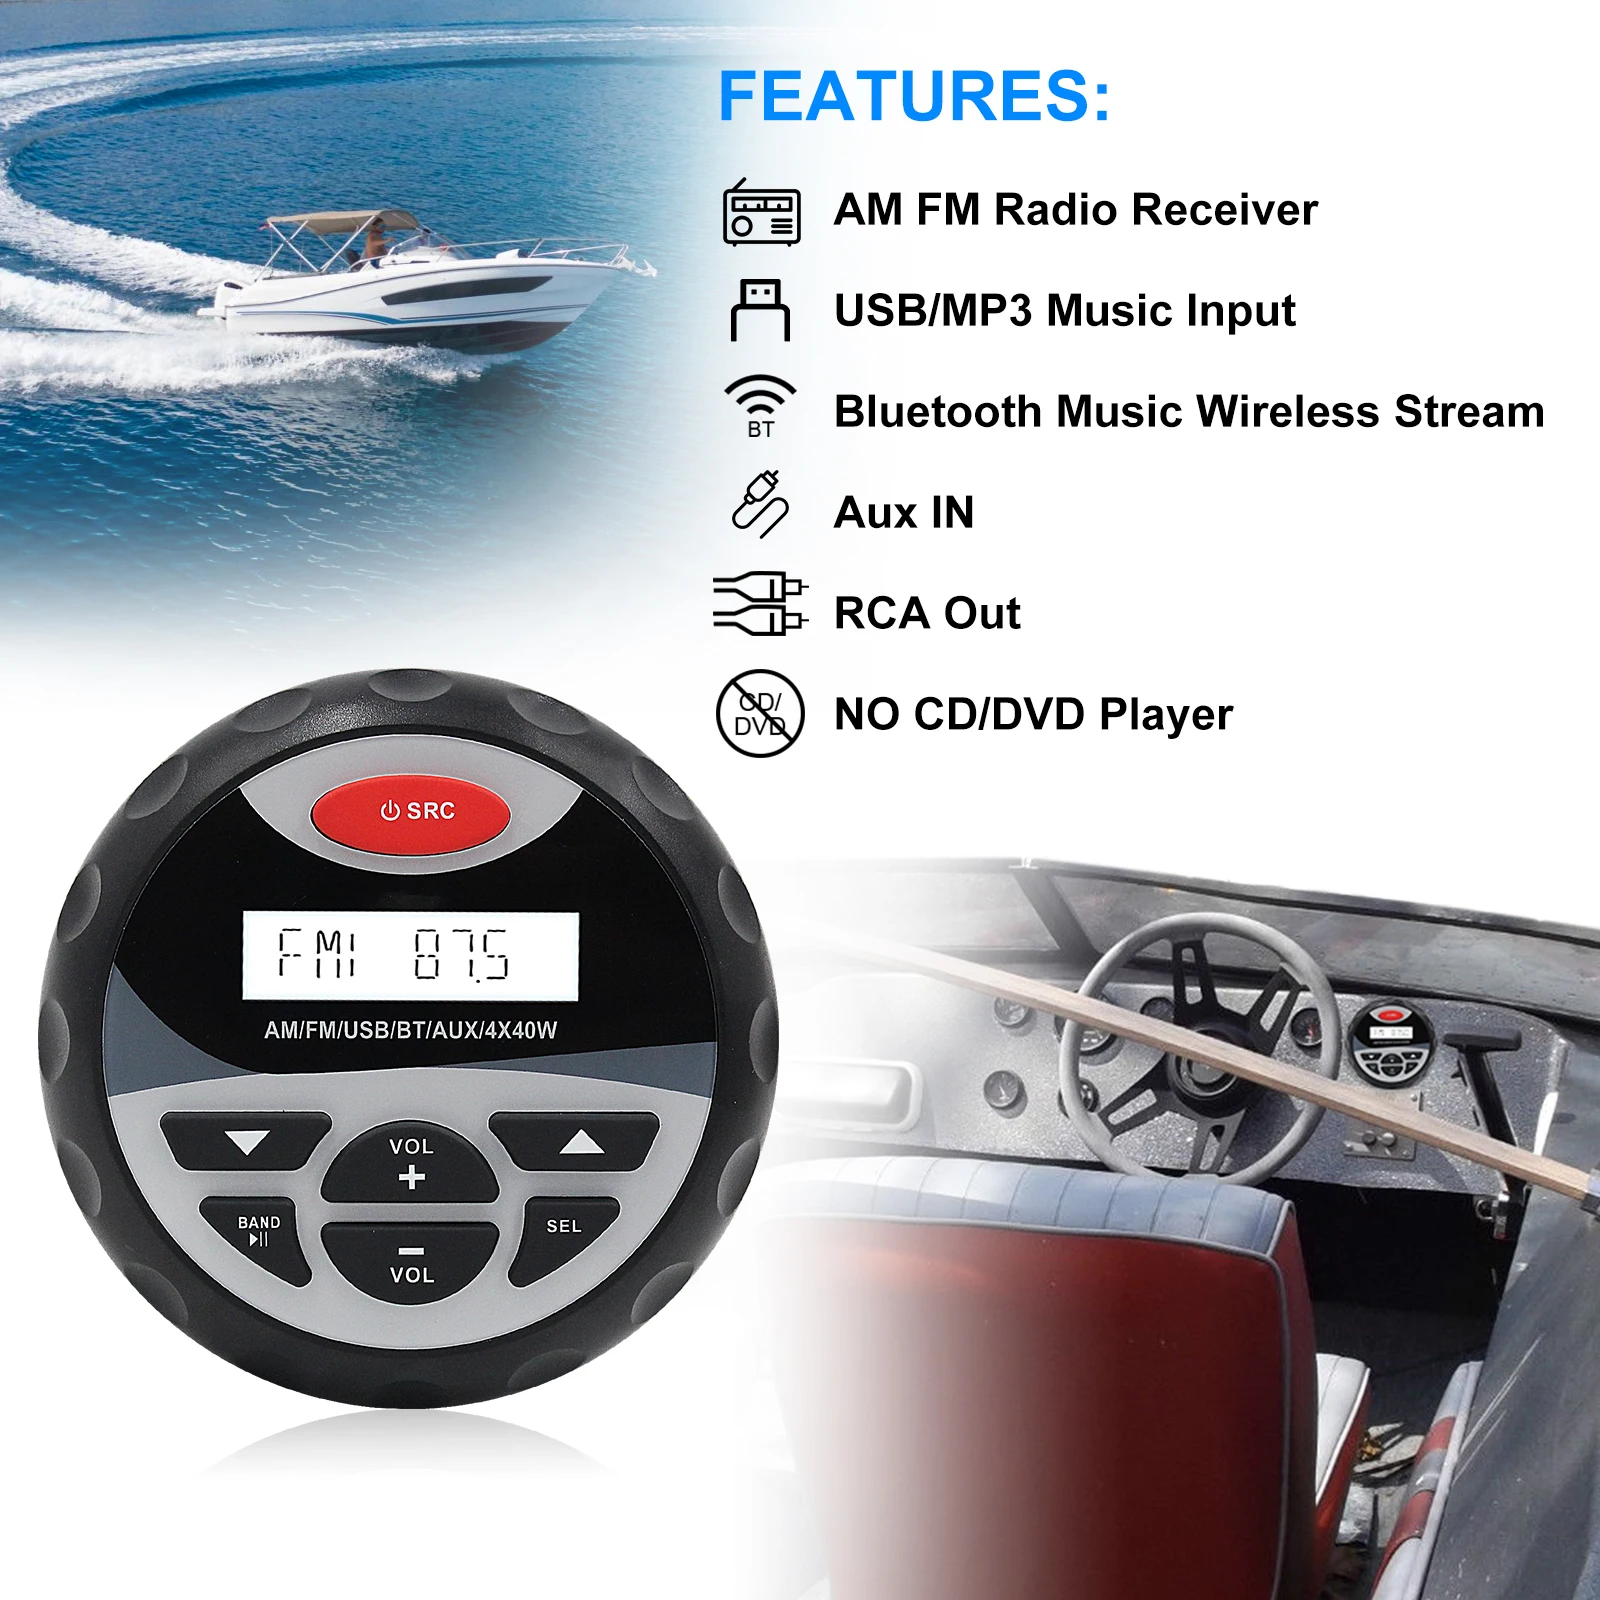 

Marine Motorcycle Waterproof Bluetooth Radio Stereo Boat Audio AM FM Receiver USB Charger MP3 Player AUX RCA For Car SPA ATV UTV